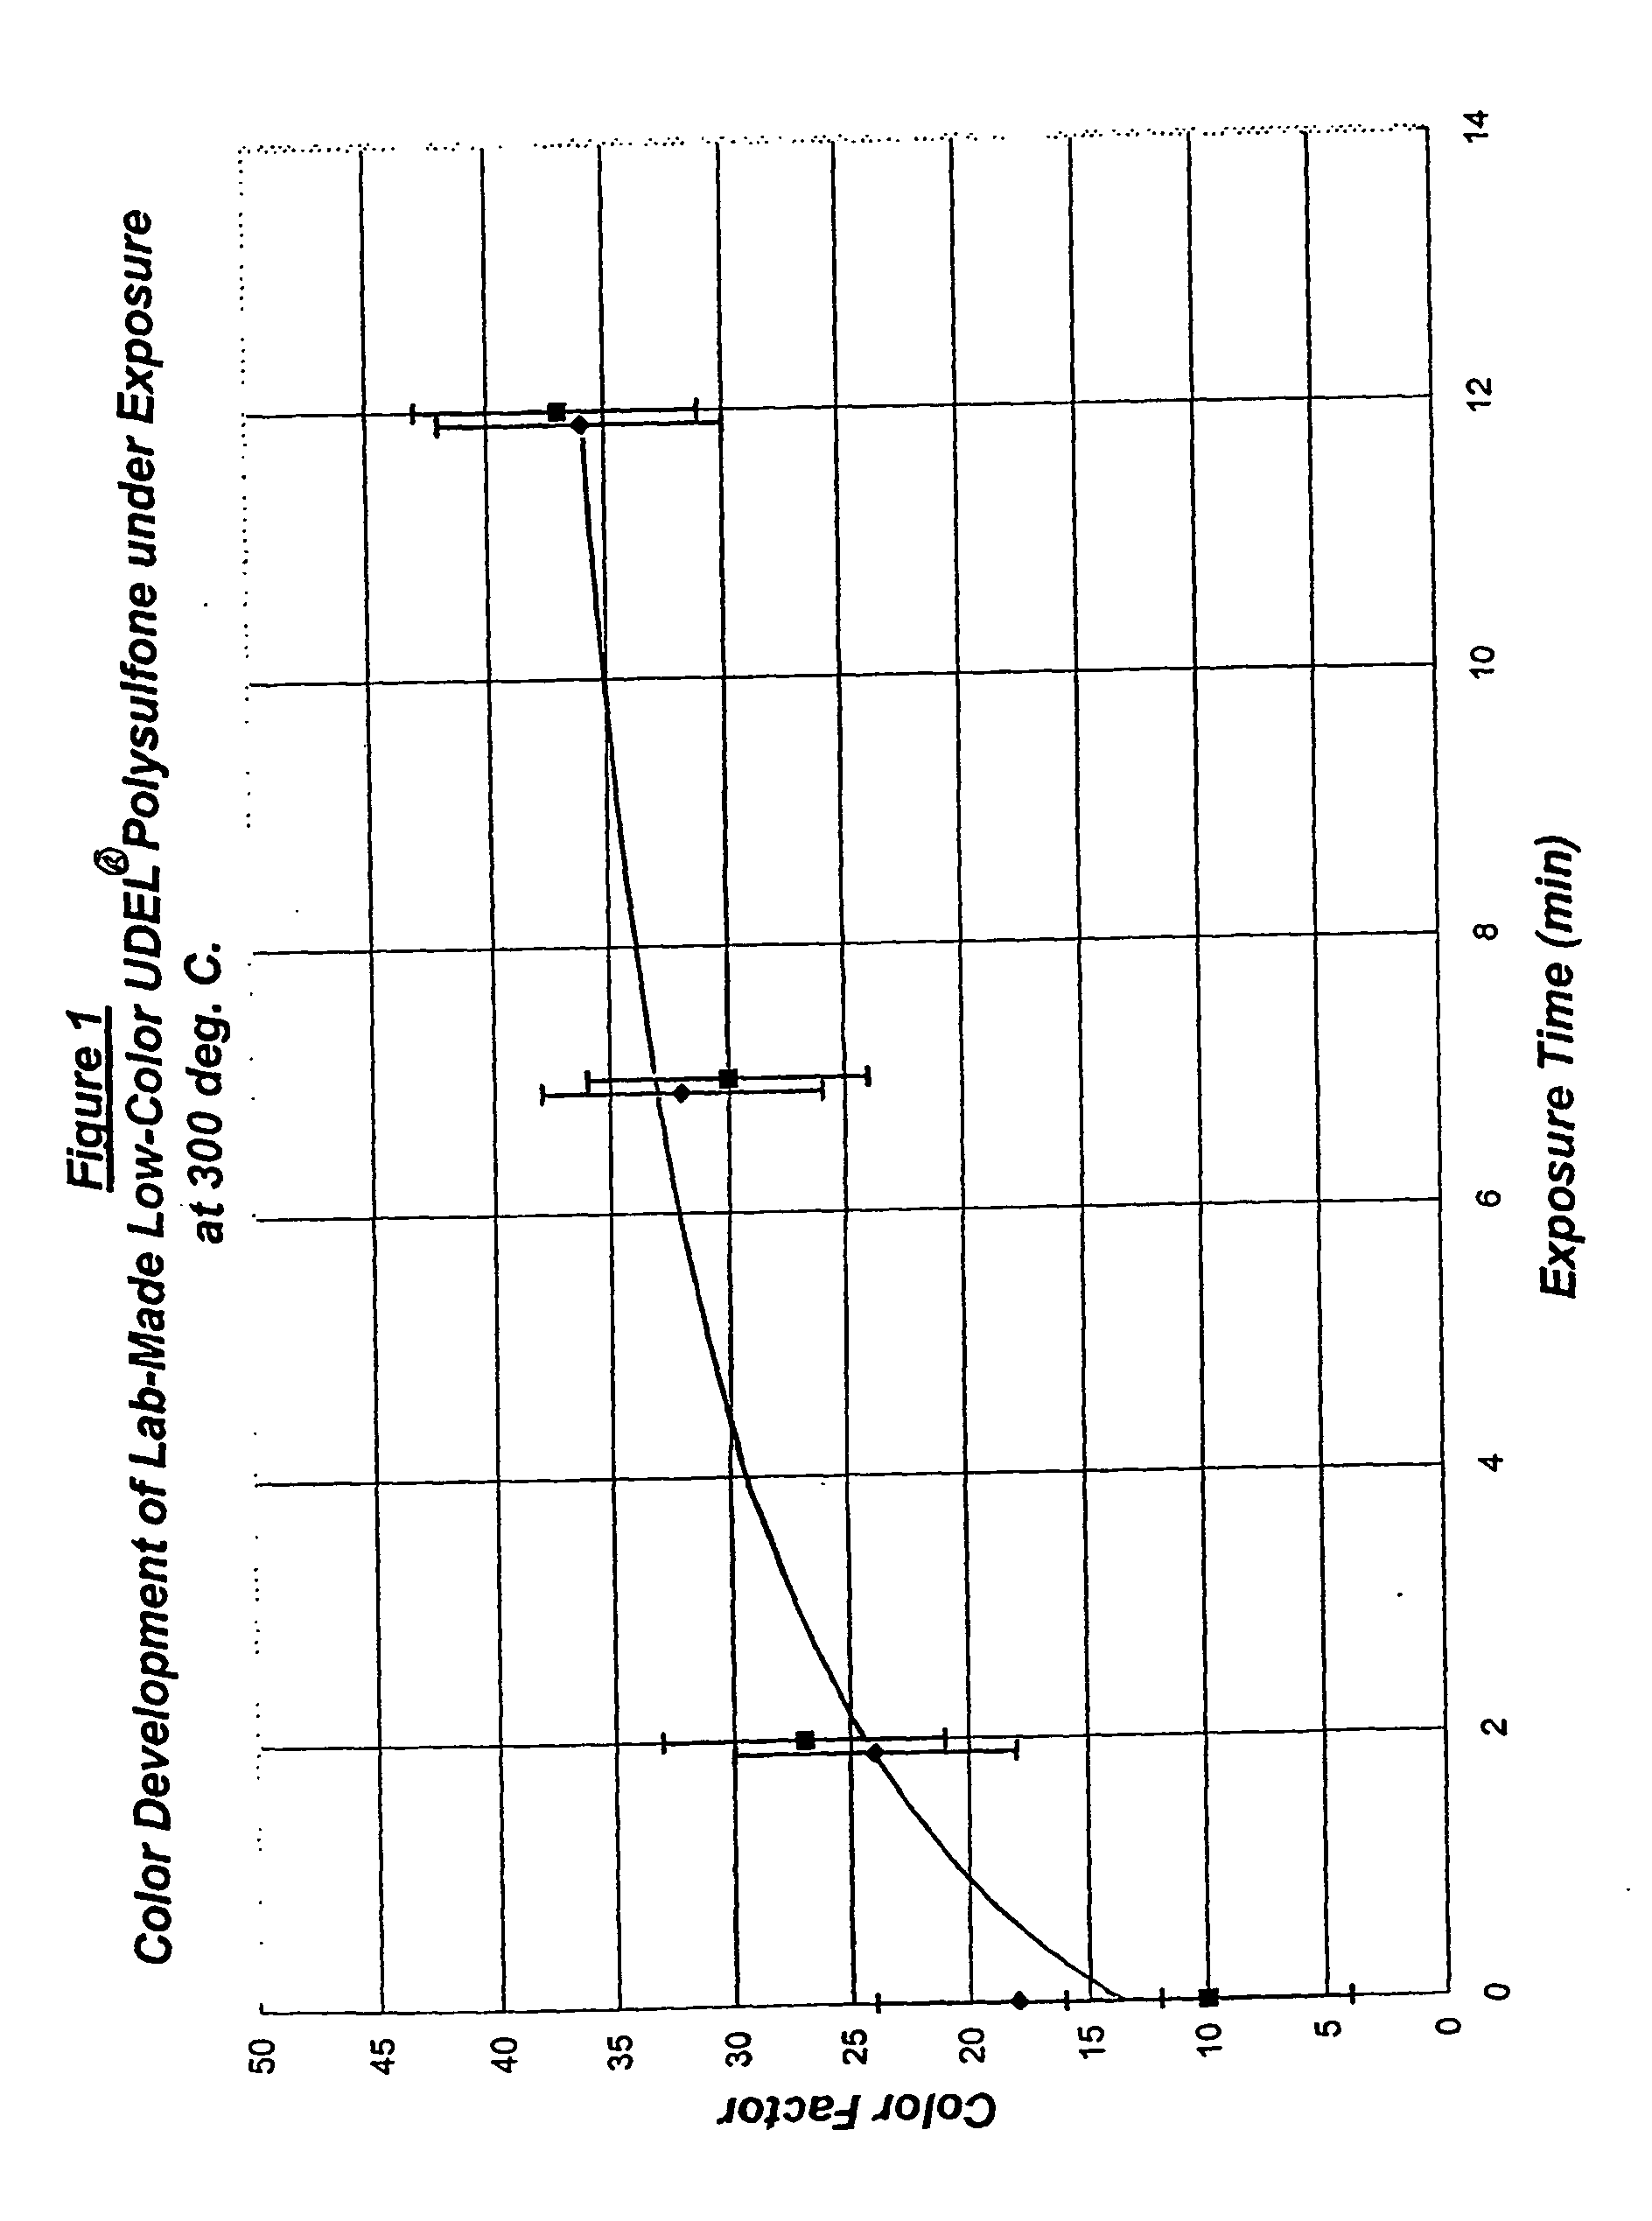 Polysulfone compositions exhibiting very low color and high light transmittance properties and articles made therefrom